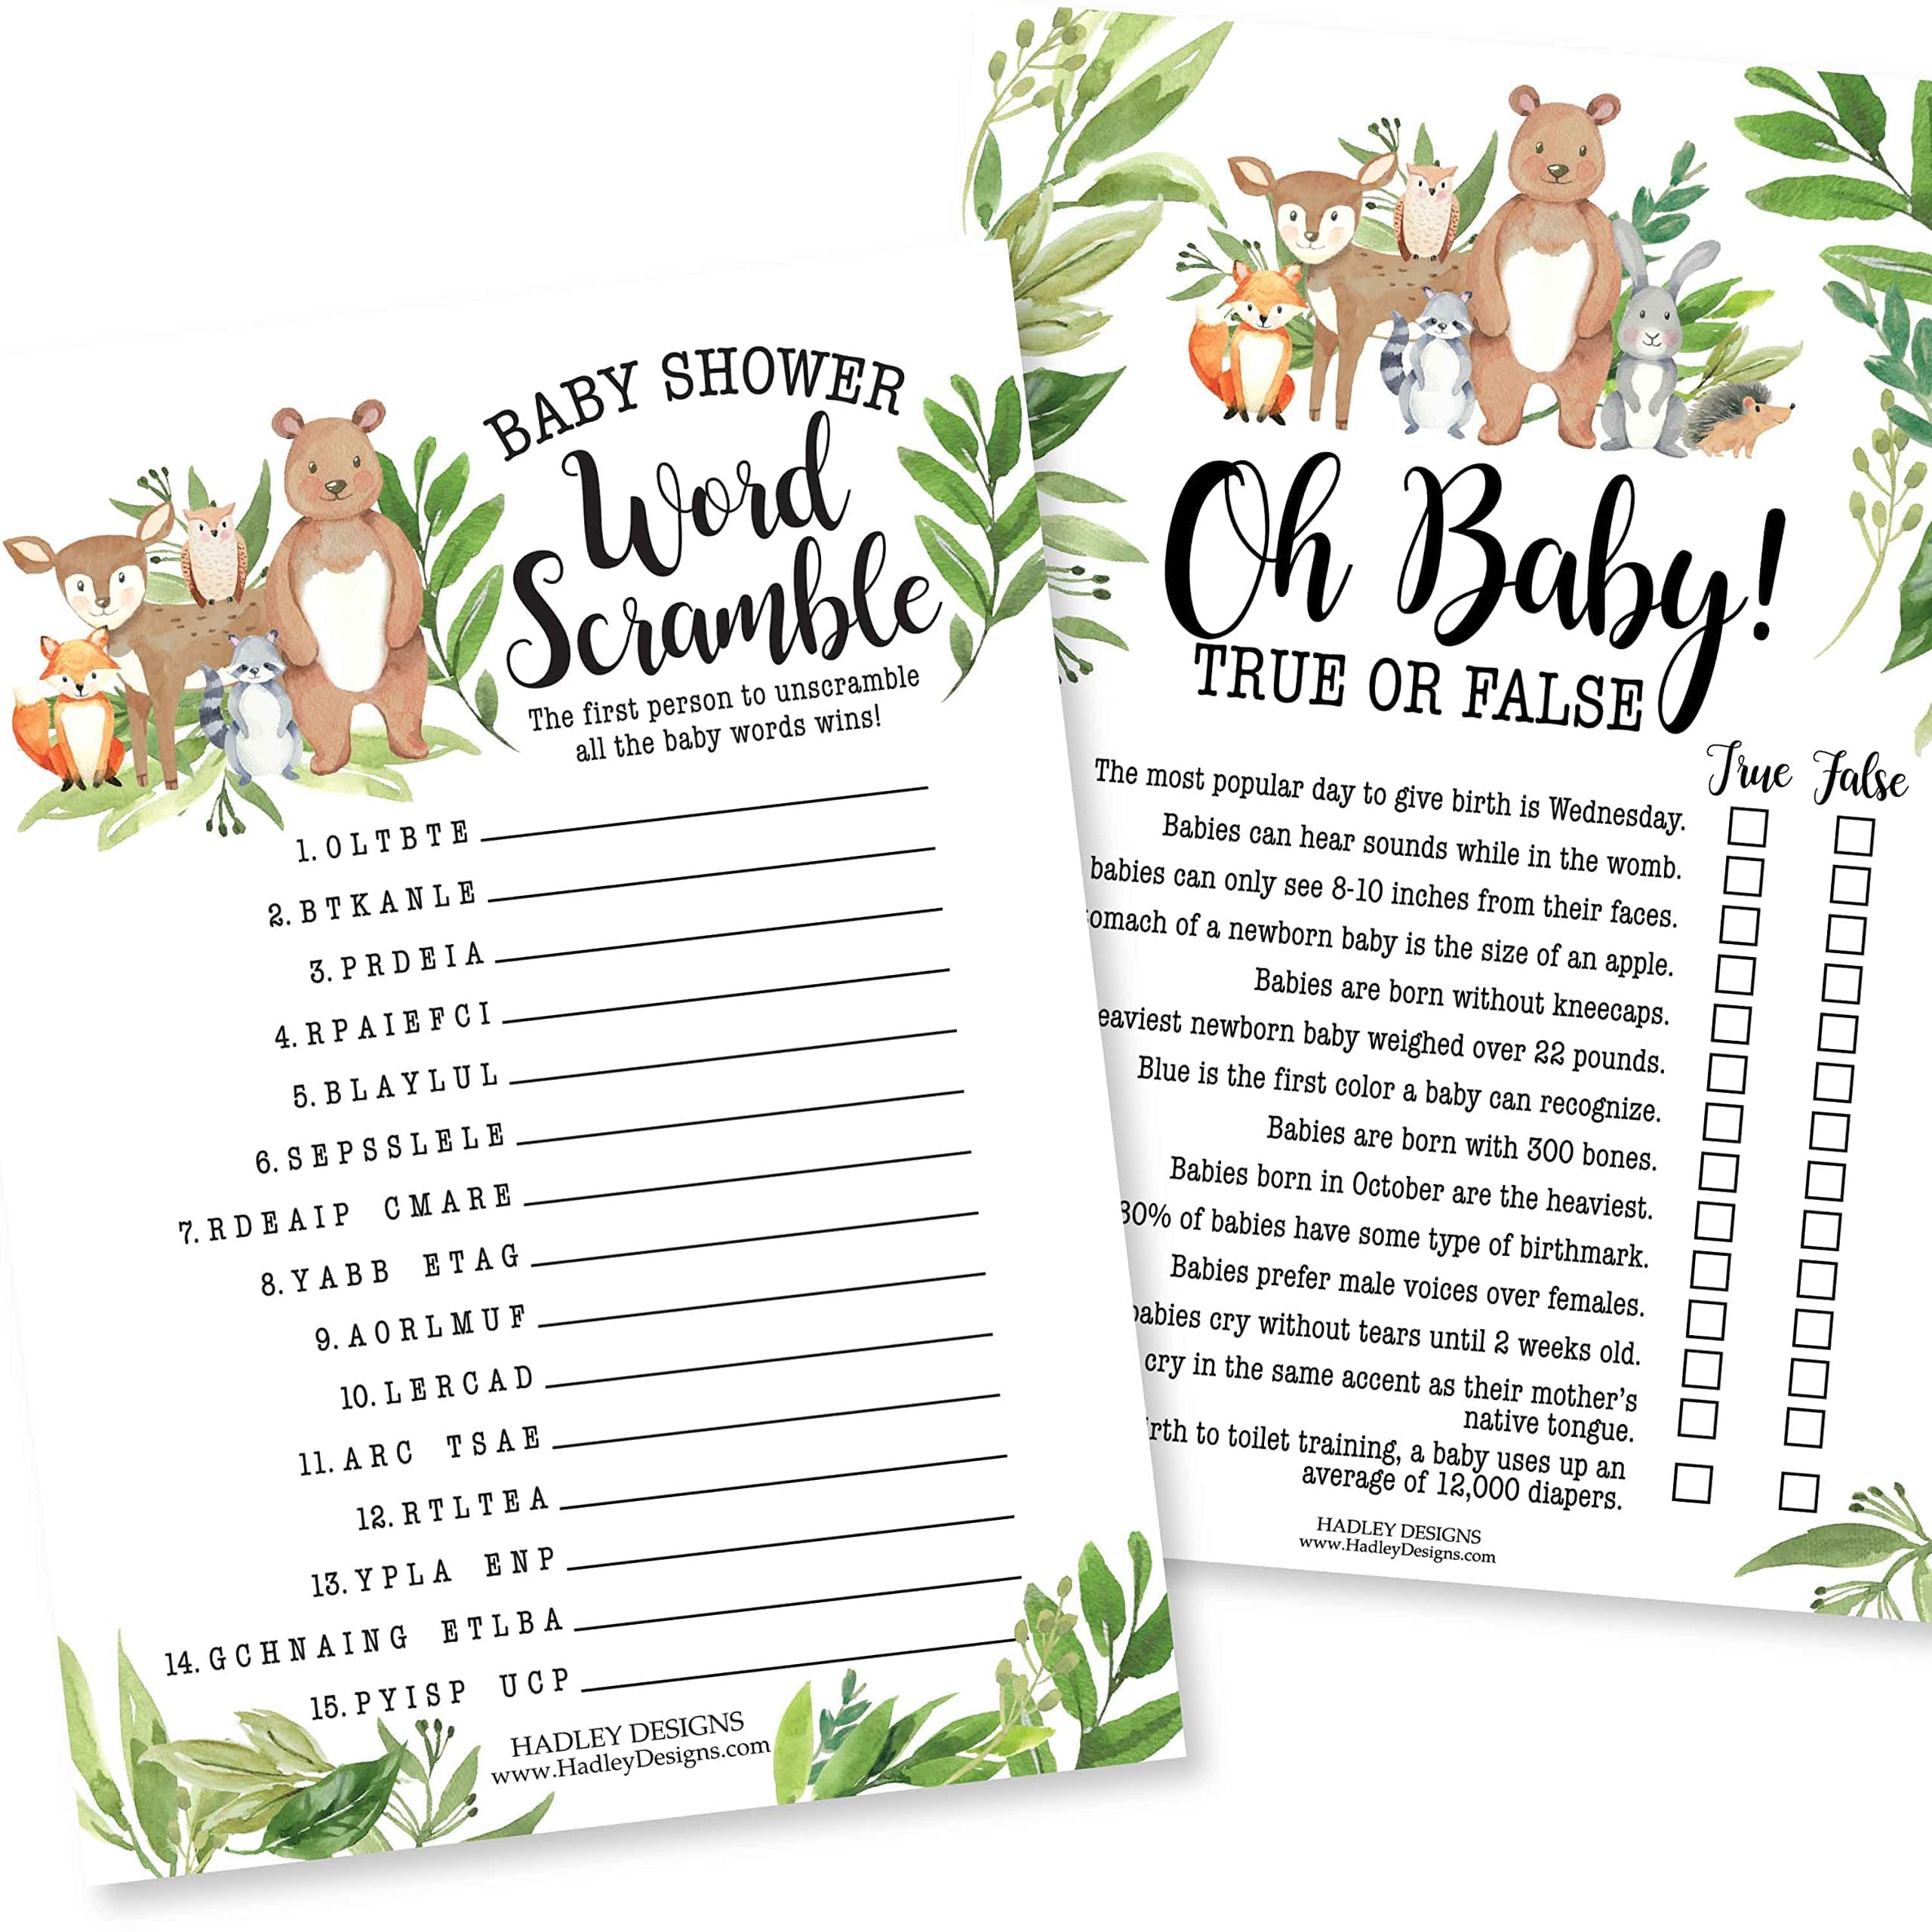 25 Woodland Animal Matching, 25 Nursery Rhyme Game, 25 Word Scramble For Baby Shower, 25 True Or False Game, 25 Who Knows Mommy Best, 25 Baby Prediction And Advice Cards - 6 Double Sided Cards